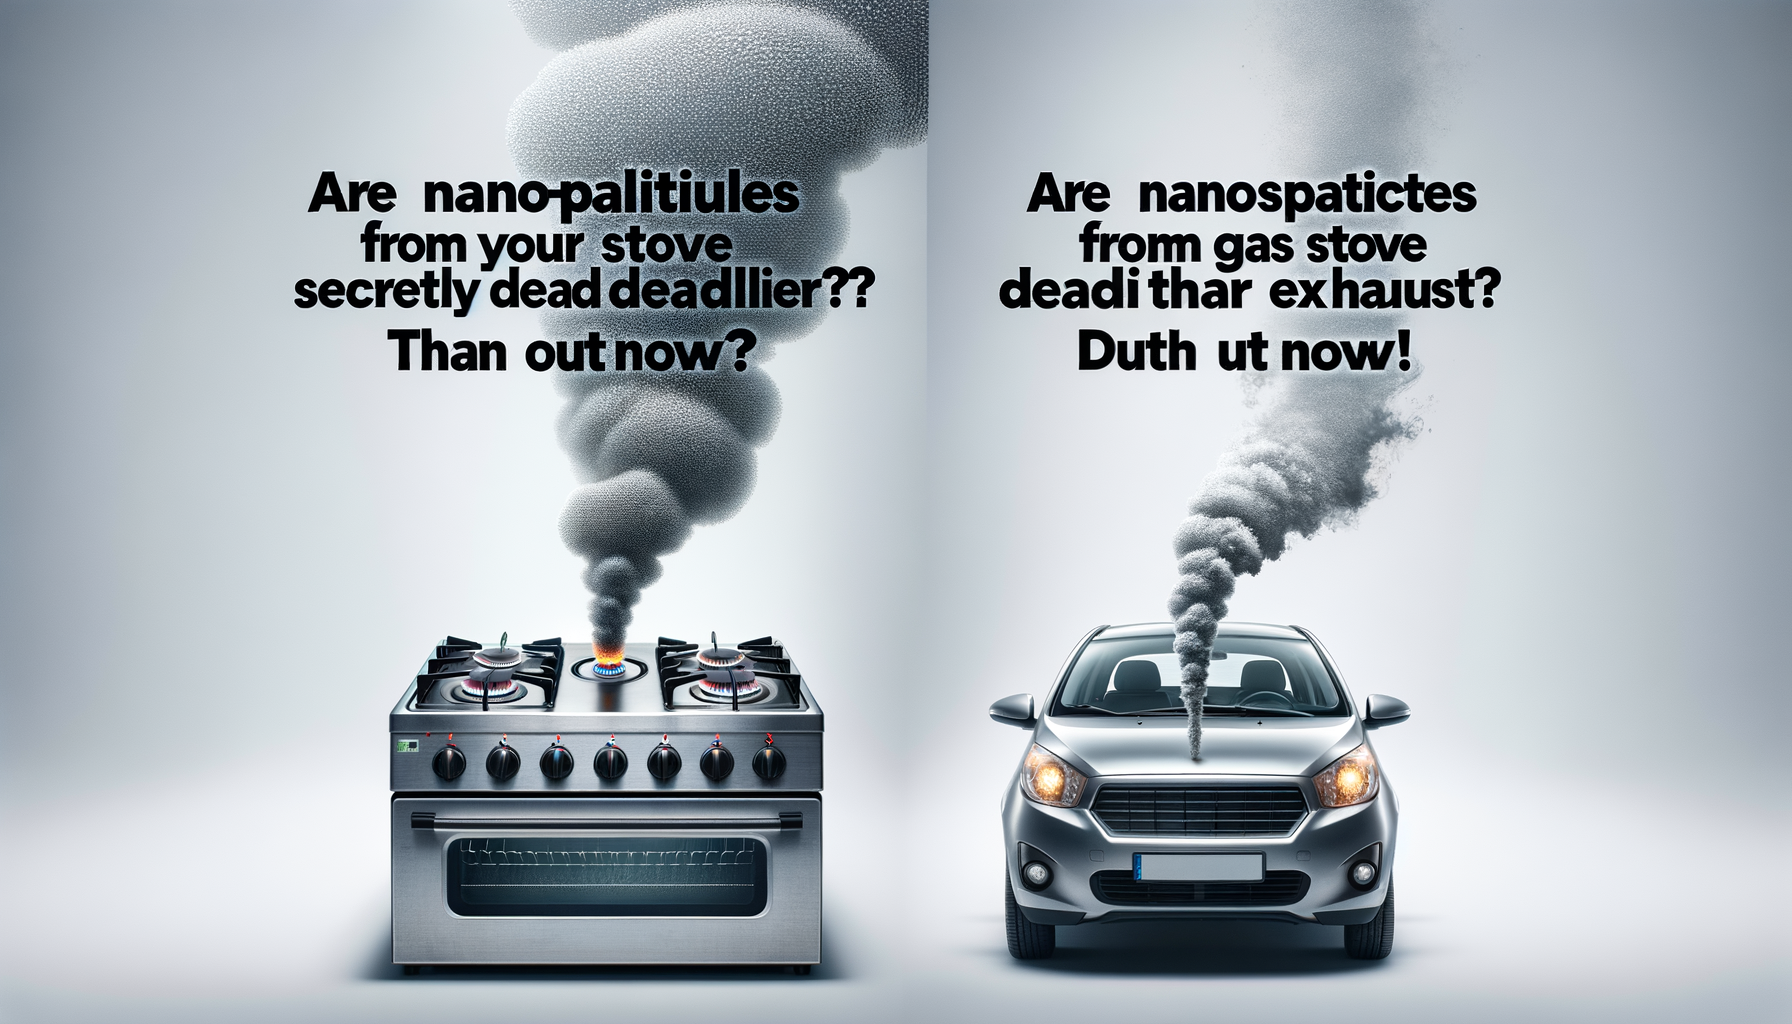 discover the potential dangers of nanoparticles from gas stoves compared to car exhaust and why you should be concerned. get the facts now!